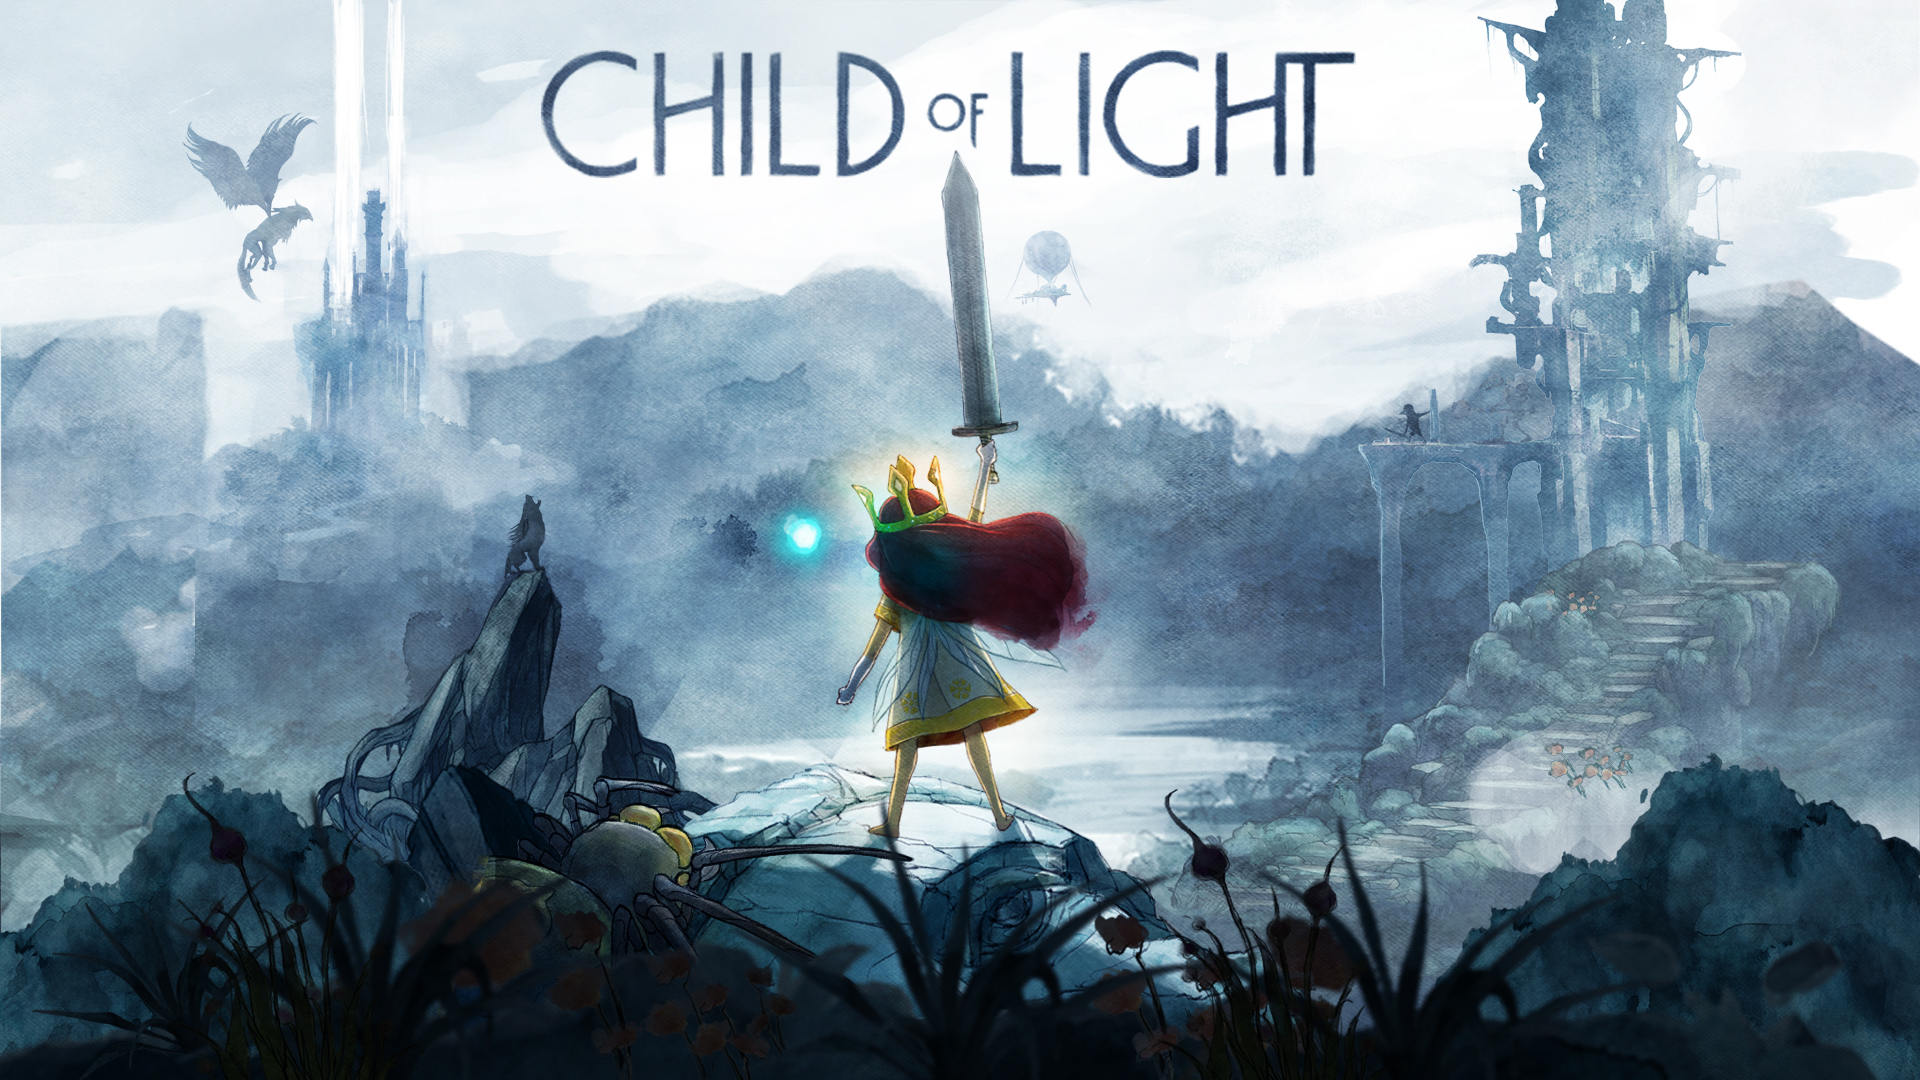 child-of-light-listing-thumb-02-ps4-us-11sep14.png